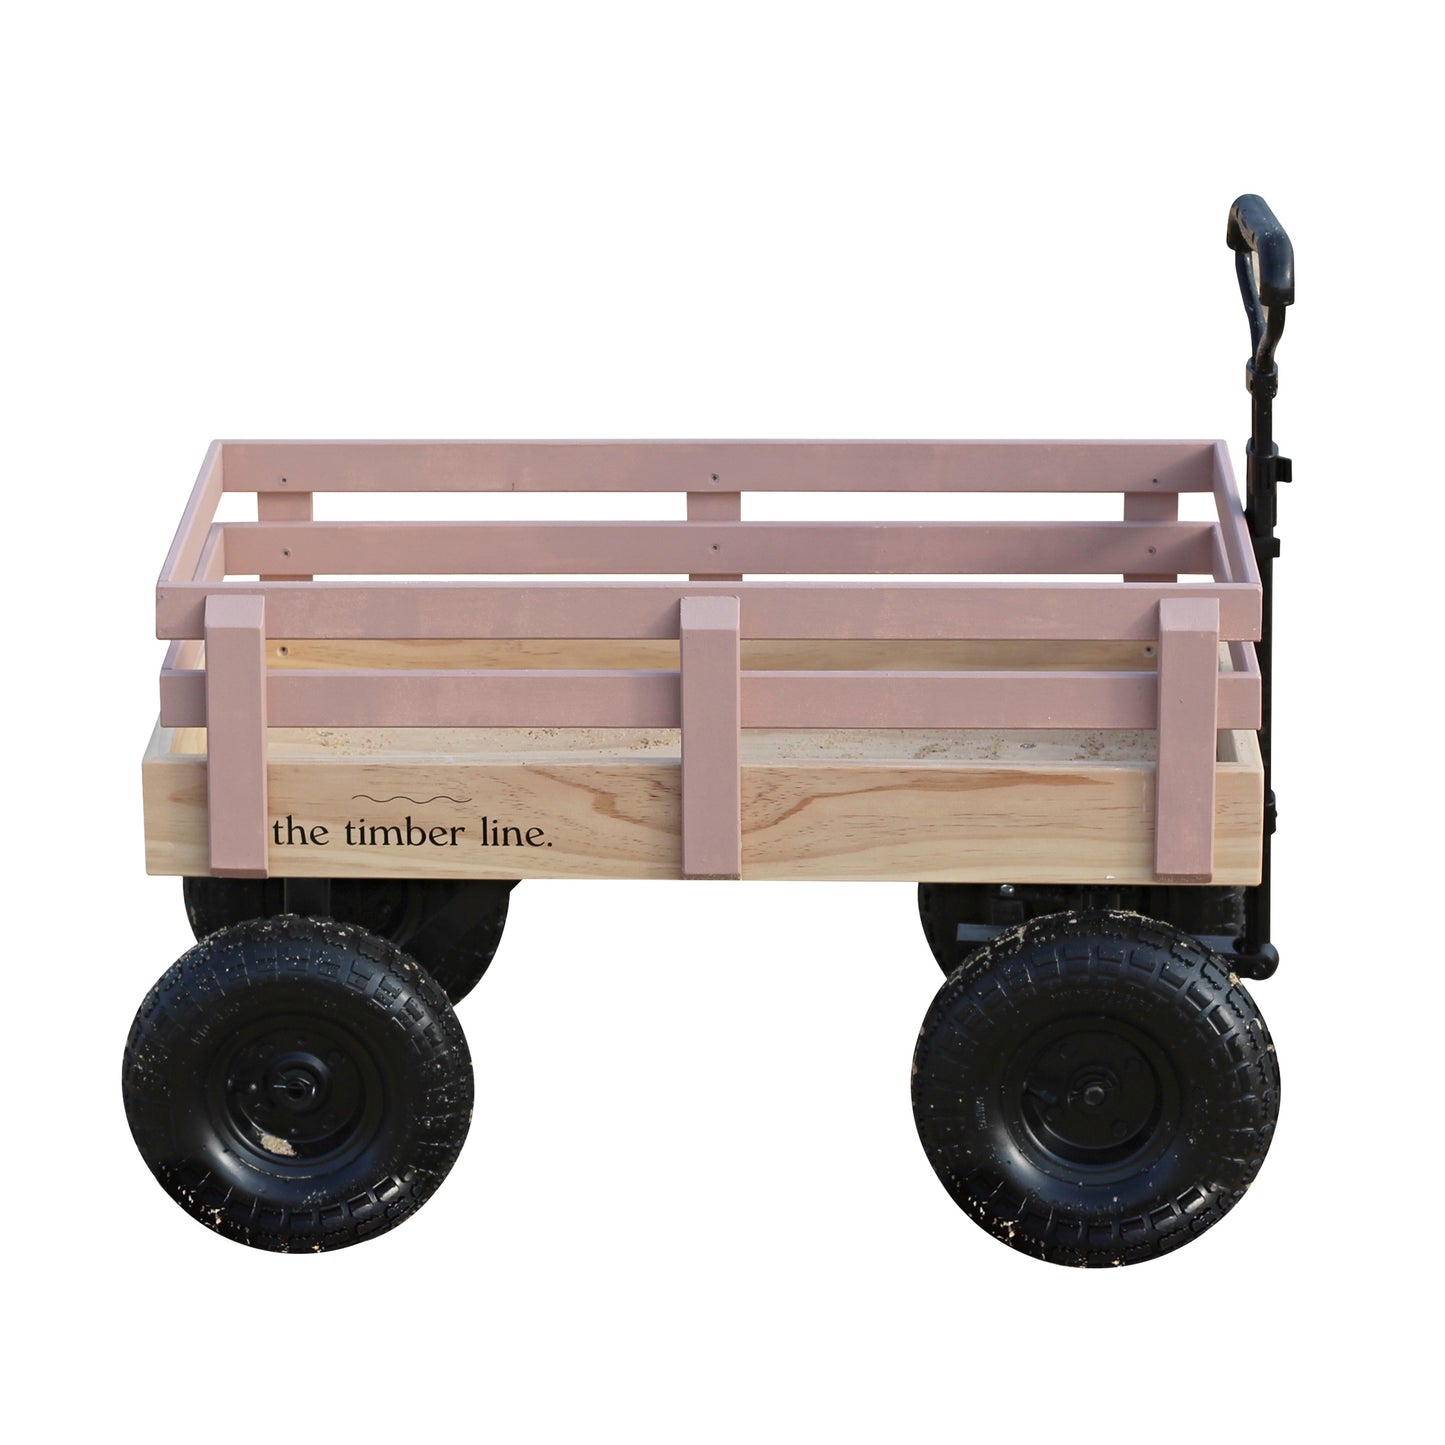 Products Buggy in Mushroom Mover